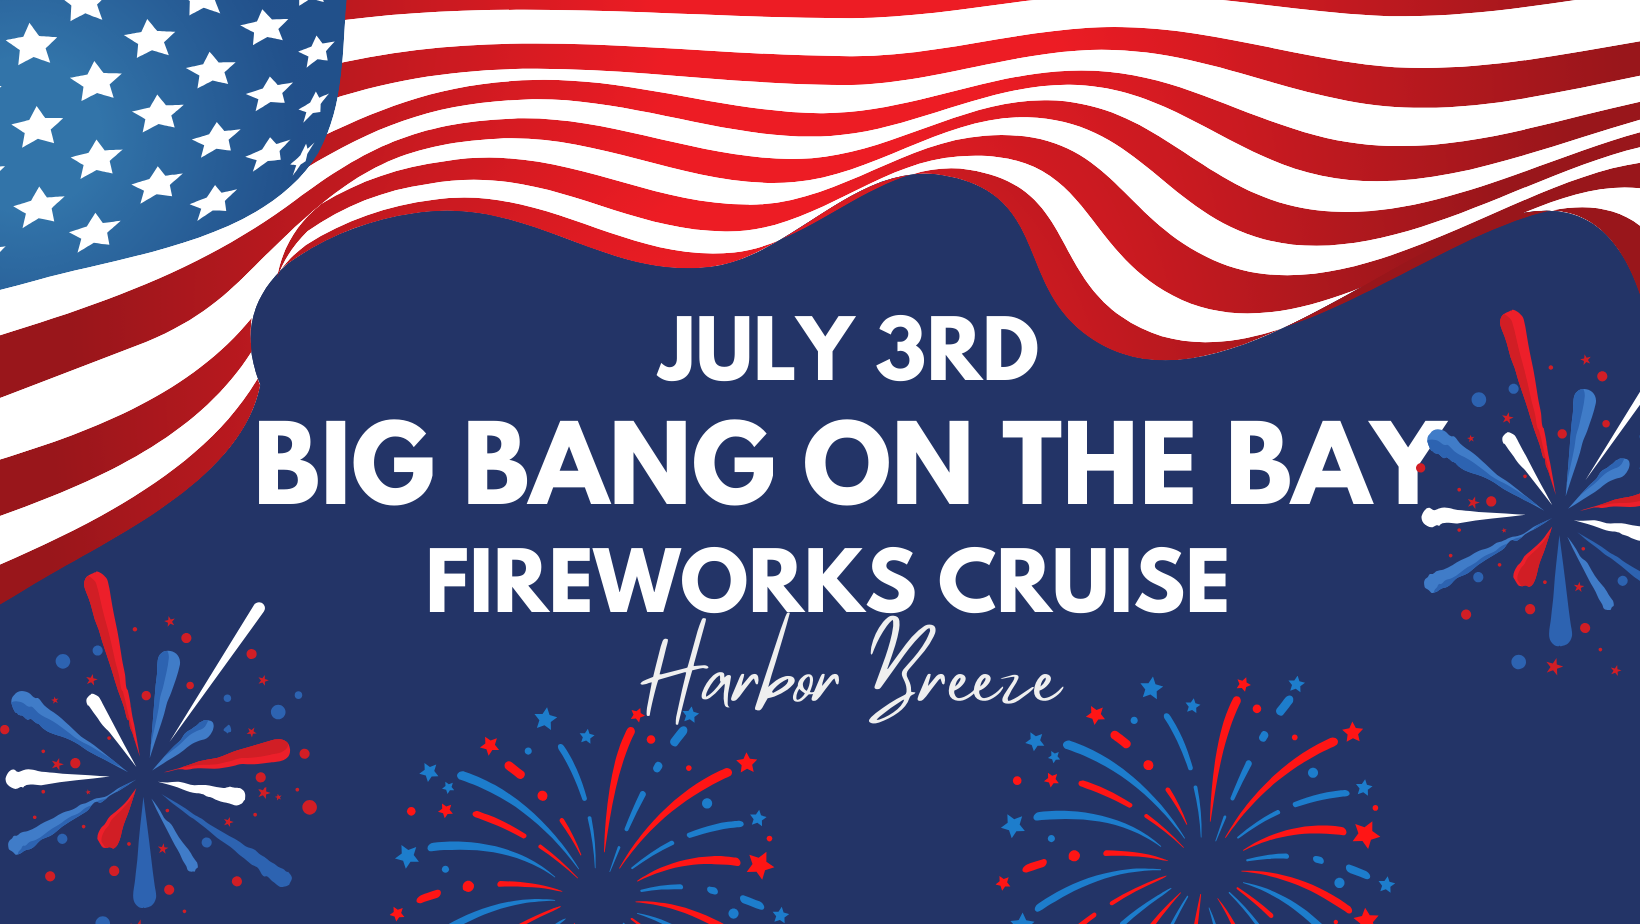 July 3rd Big Bang on the Bay Fireworks Cruise from LONG BEACH